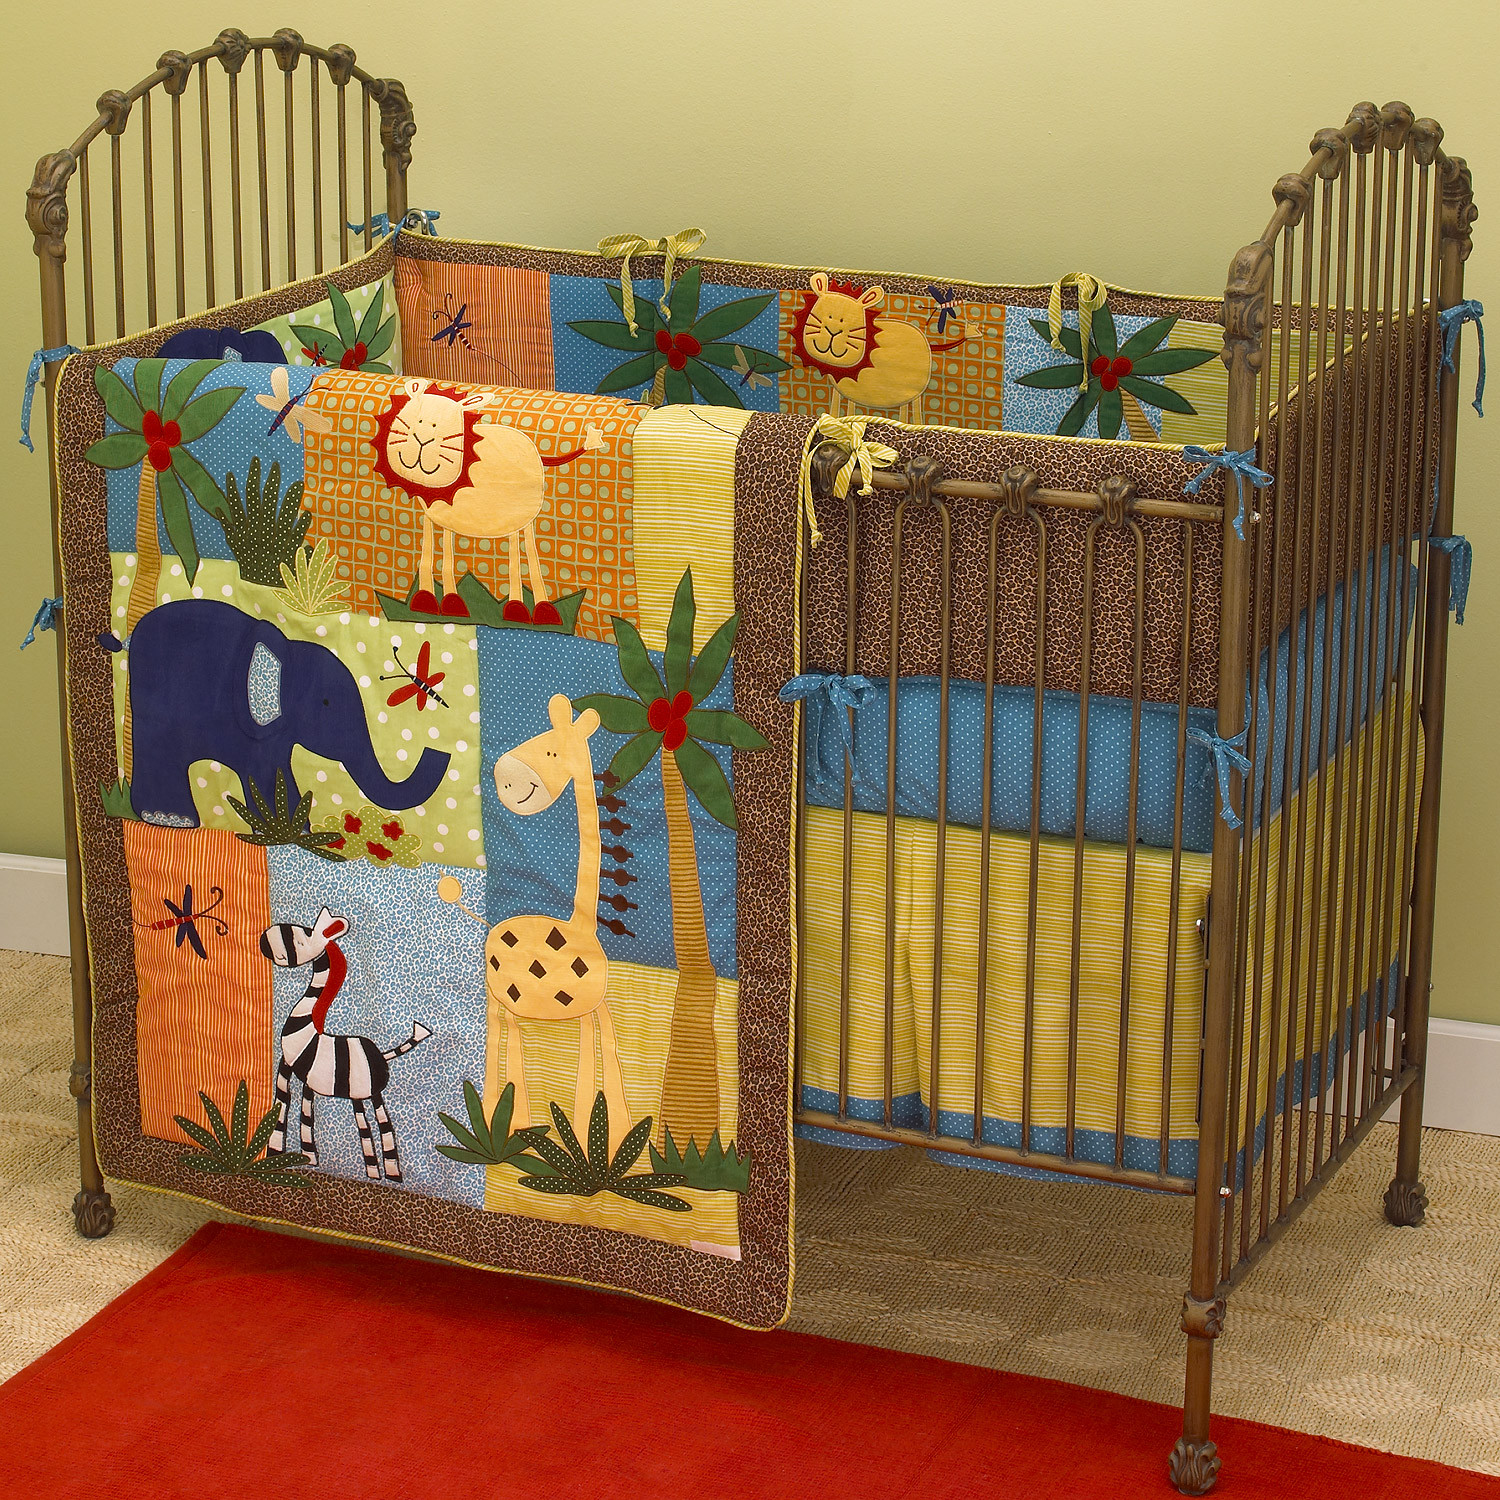 Jungle Baby Room Decor
 Baby Room Decorating Ideas for Boys and Girls Sharing A